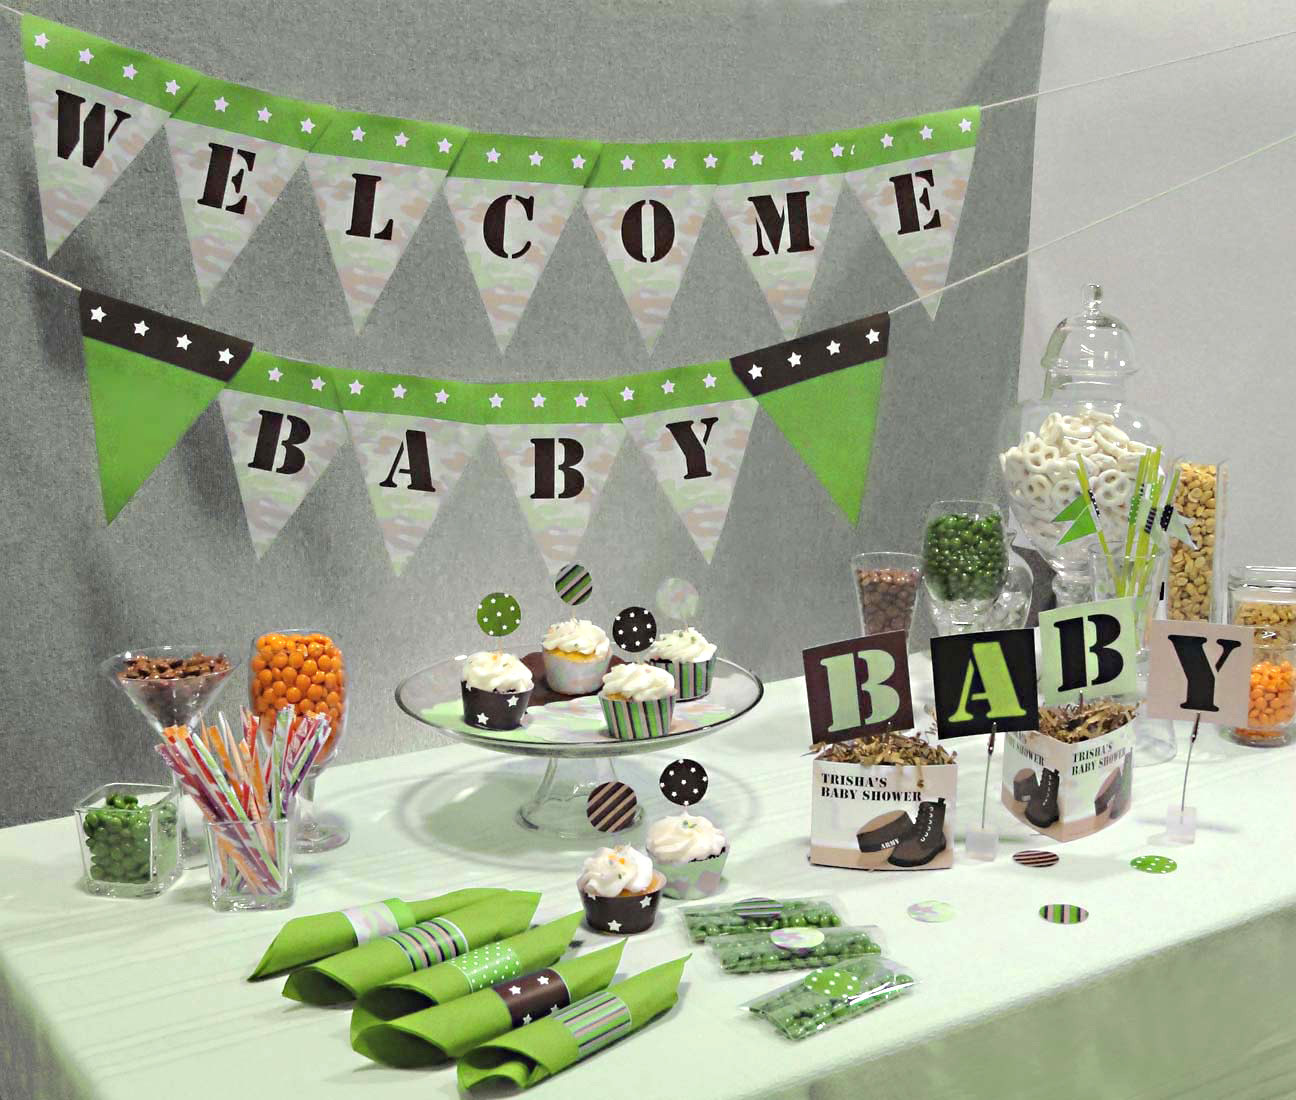 Camouflage Baby Shower Decorating Ideas
 Camouflage Baby Shower Ideas Baby Ideas